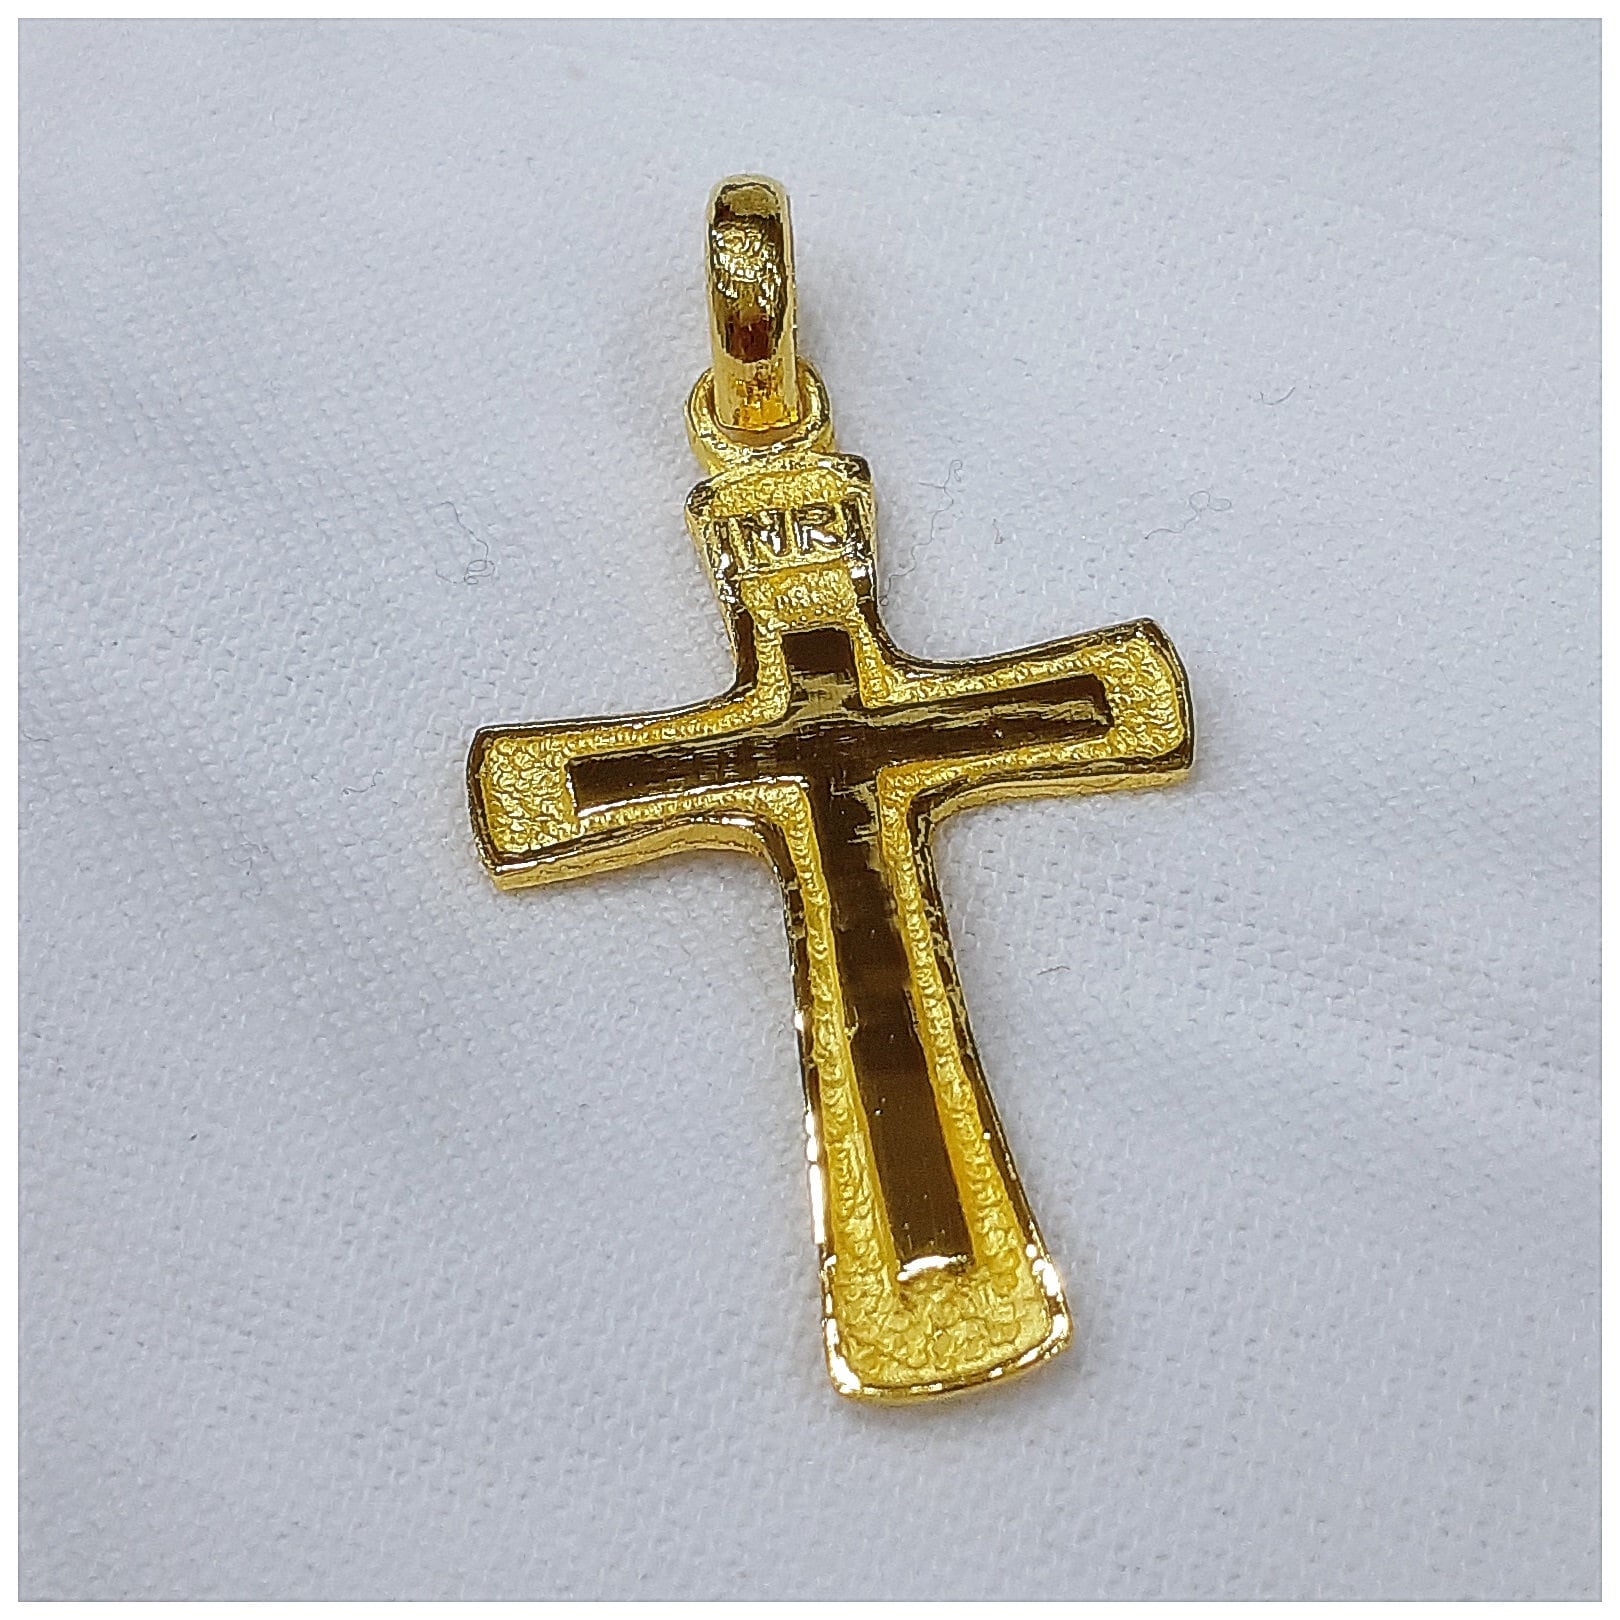 REAL GOLD 18 Kt Solid Yellow Gold Cross Necklace Pendant Without Chain 6  Grams | eBay